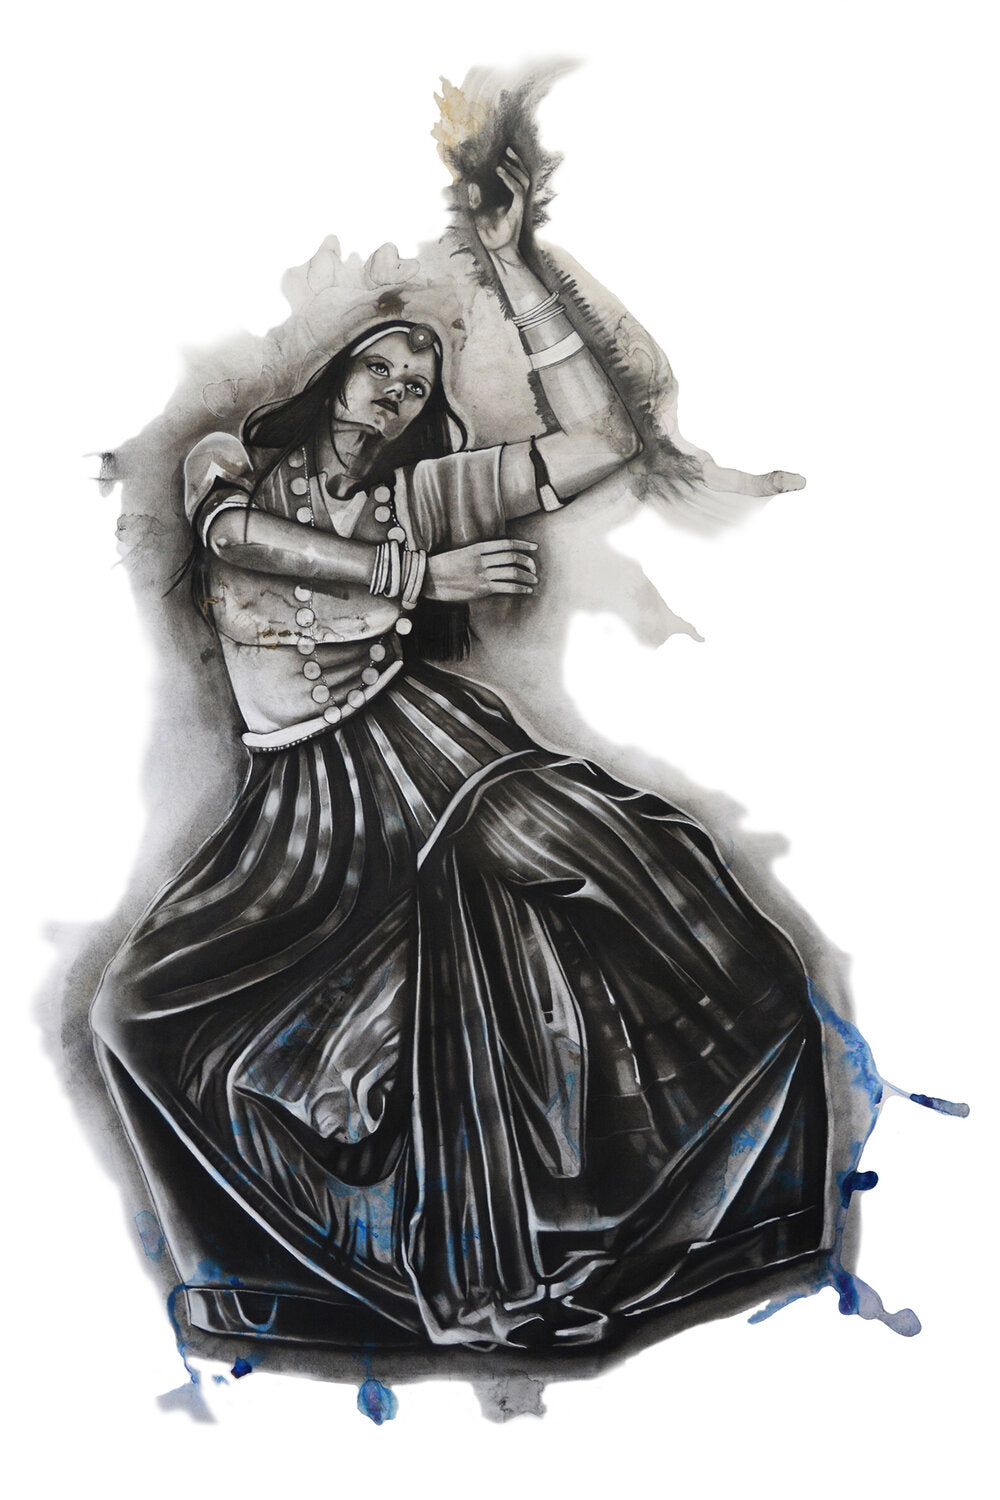 Charcoal drawing of odissi dancer 